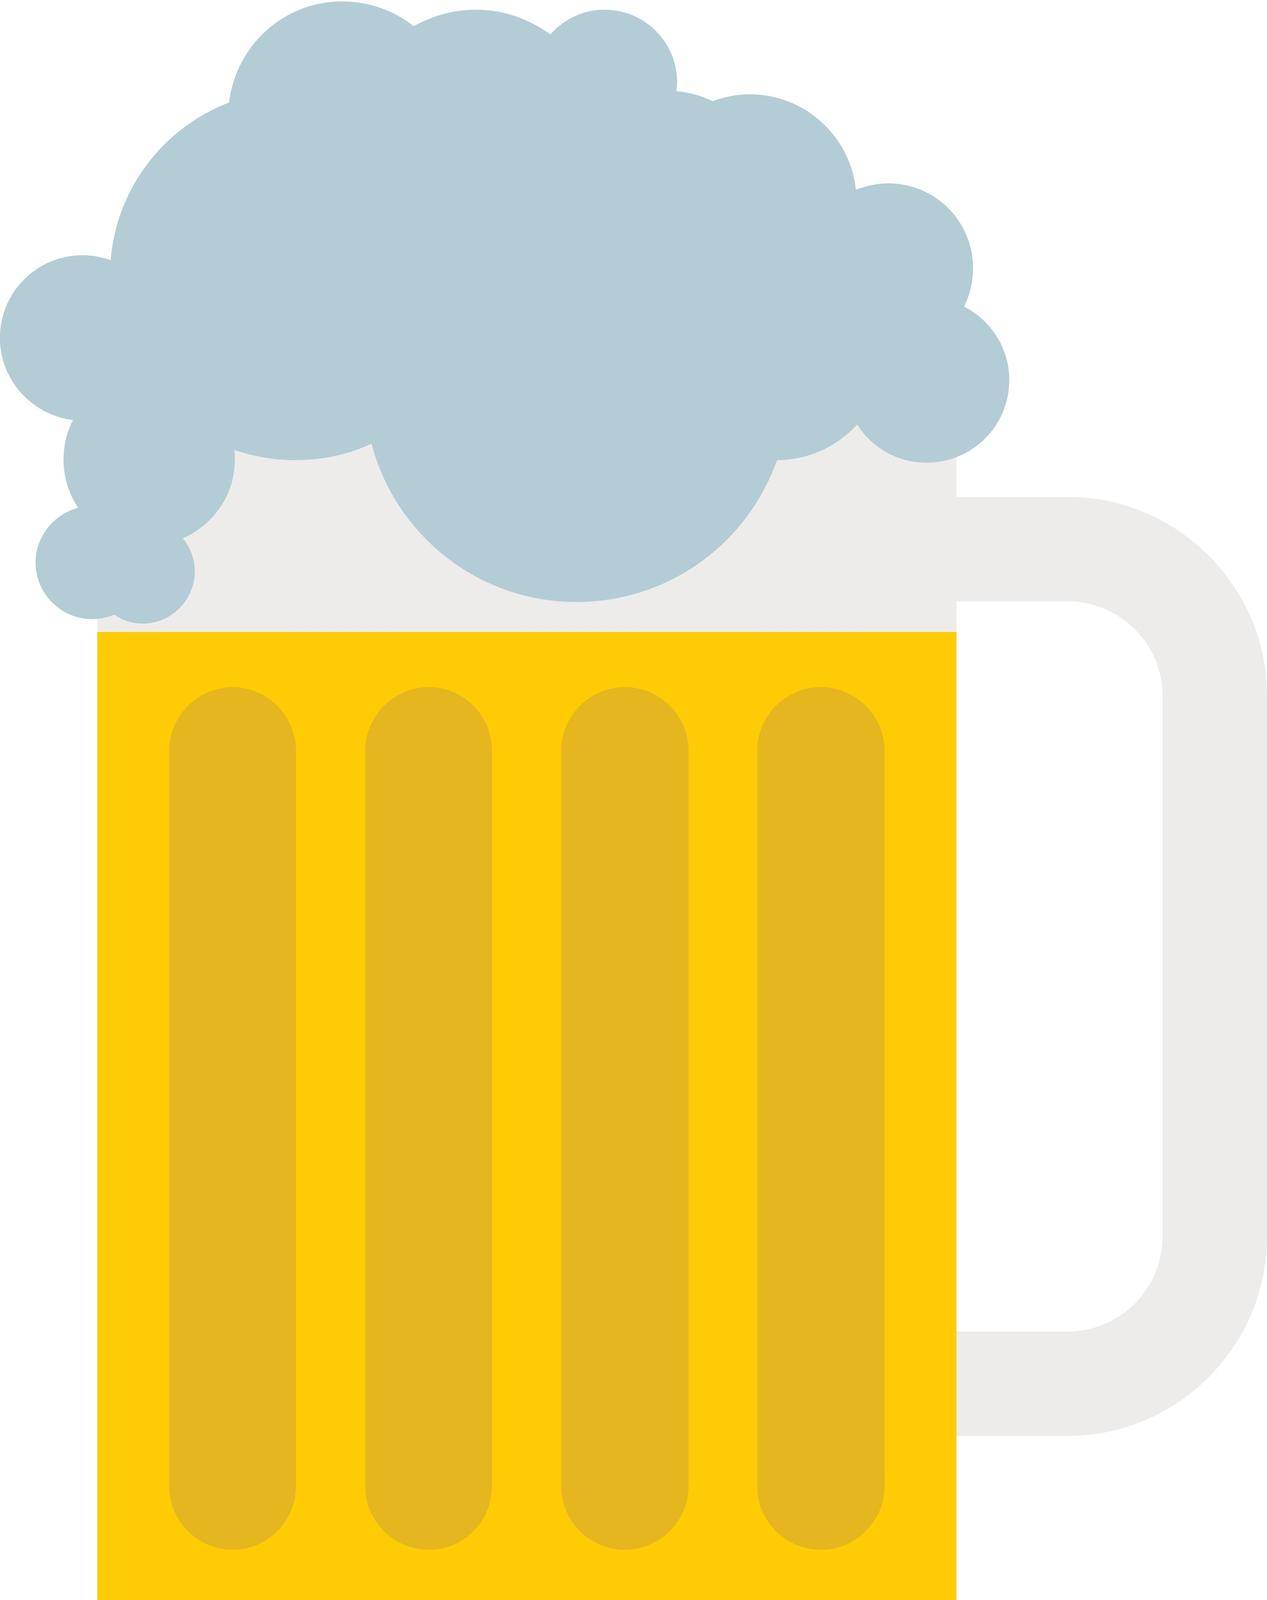 Mug of beer icon in flat style on a white background